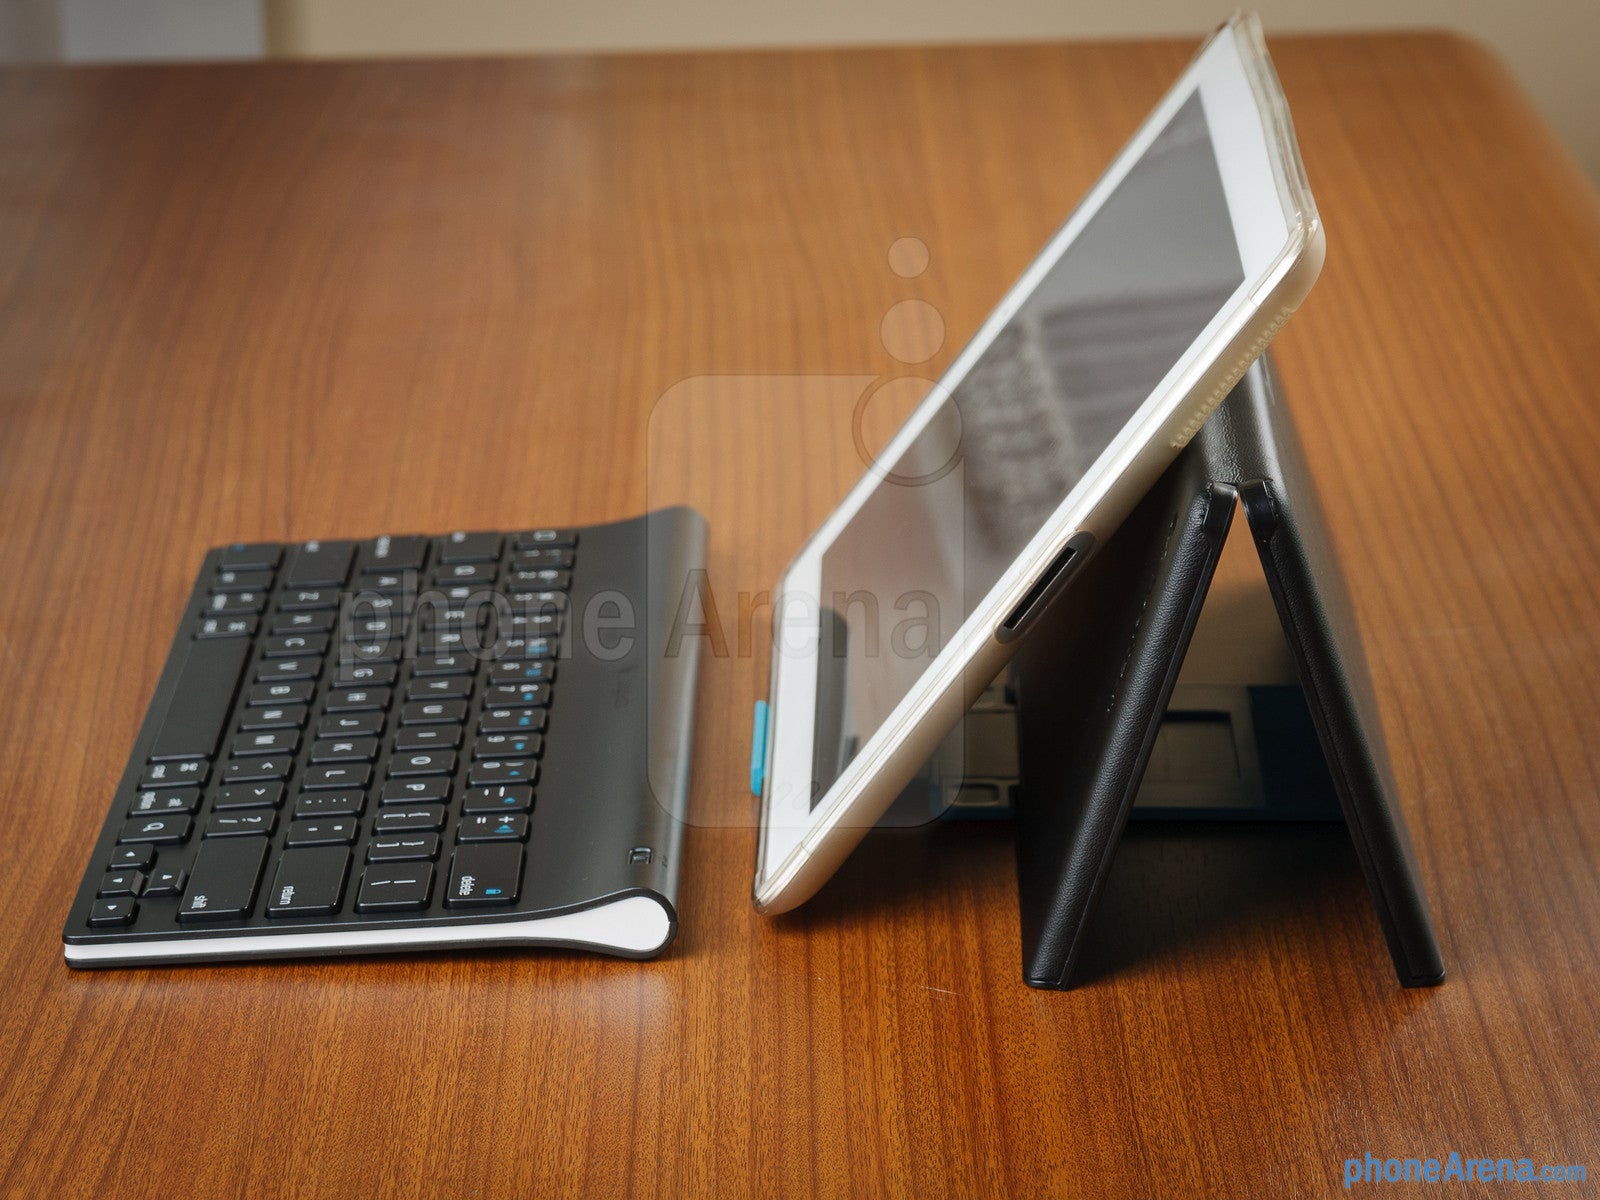 The case halves snap together - Logitech Tablet Keyboard for iPad Review